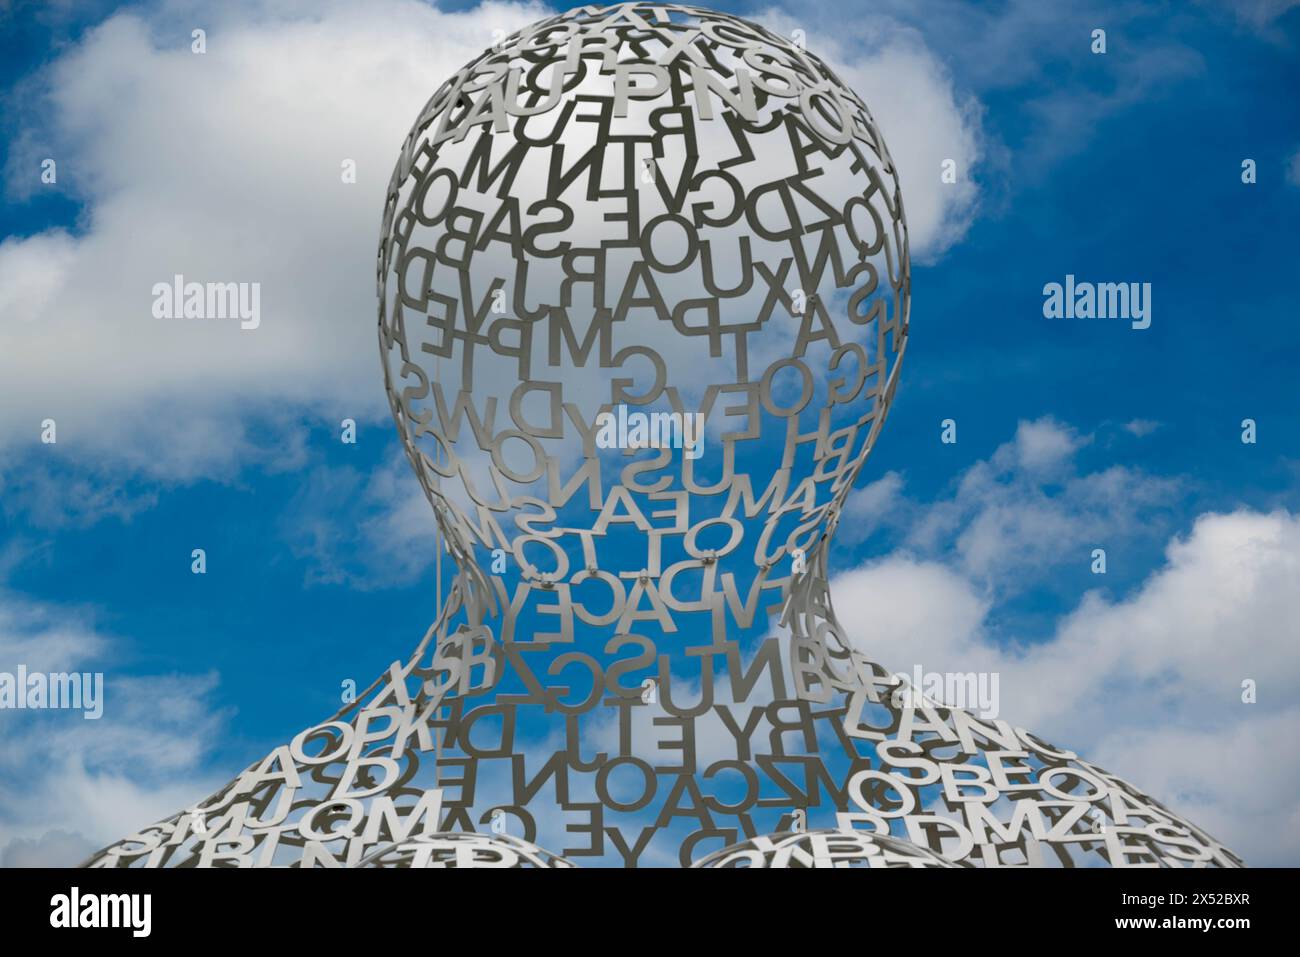 Human Image made of letters Stock Photo